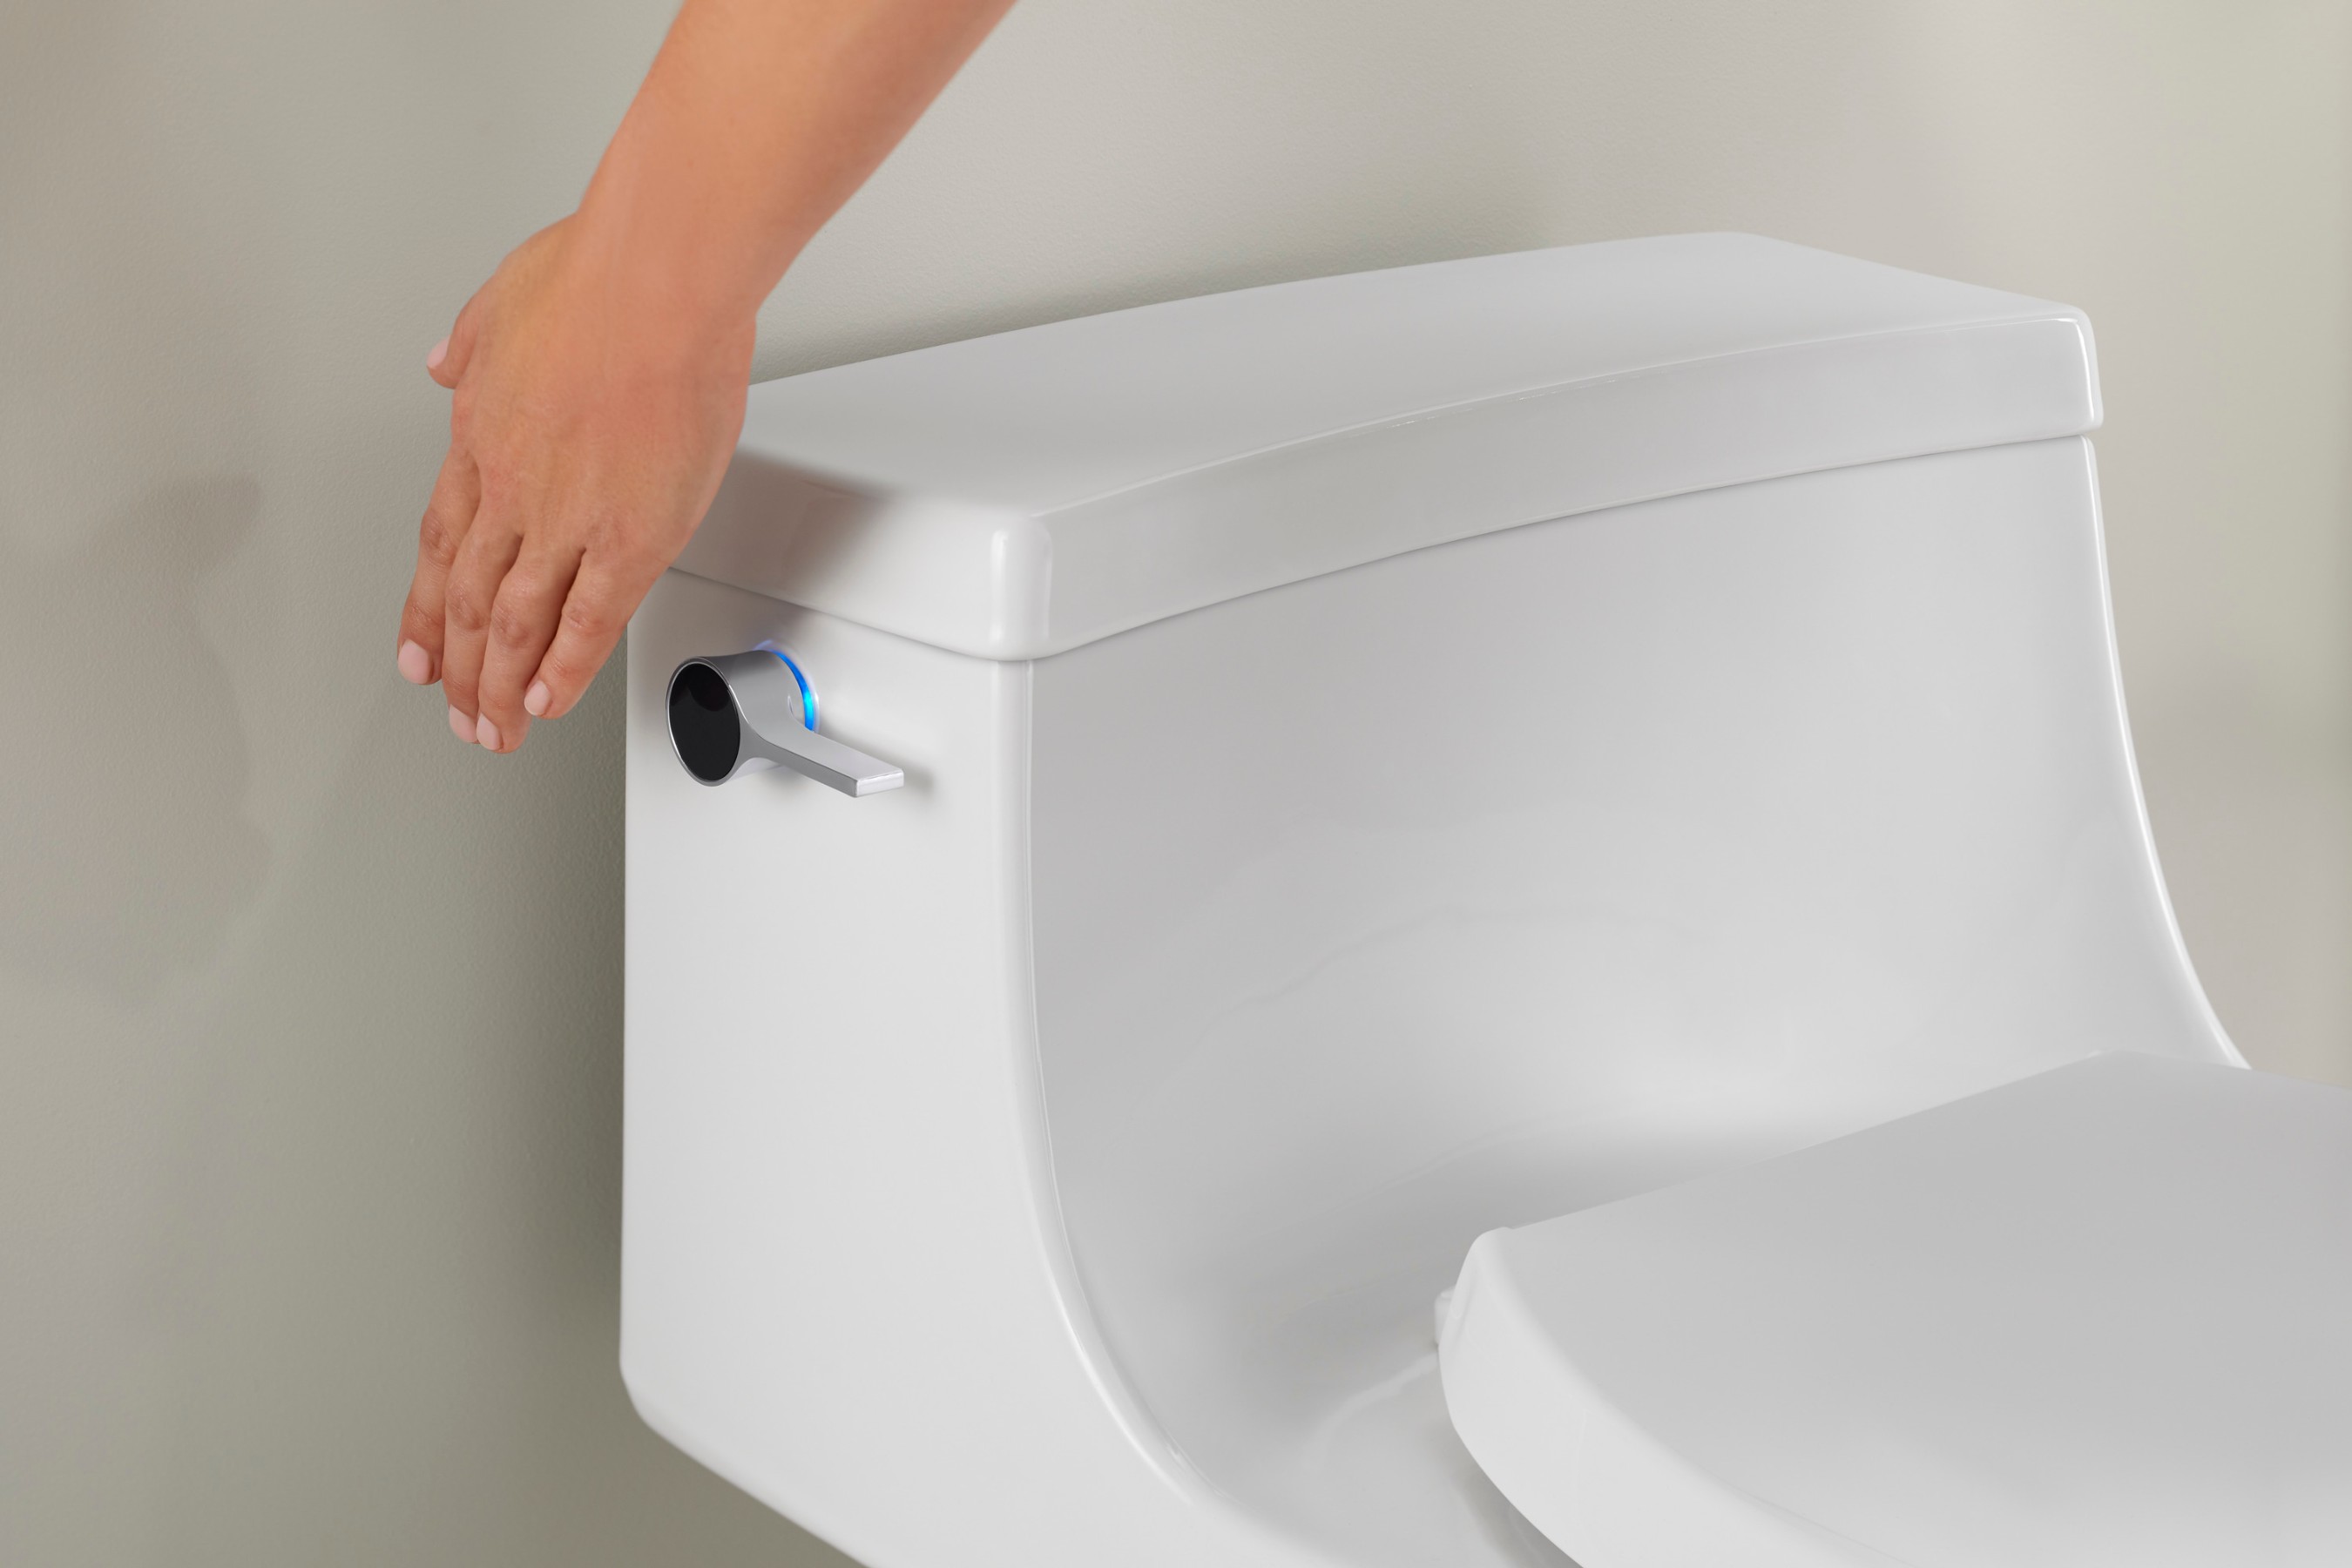 The new Touchless Toilet offers touchless flushing through the integration of a sensor placed in the flush lever of the toilet.